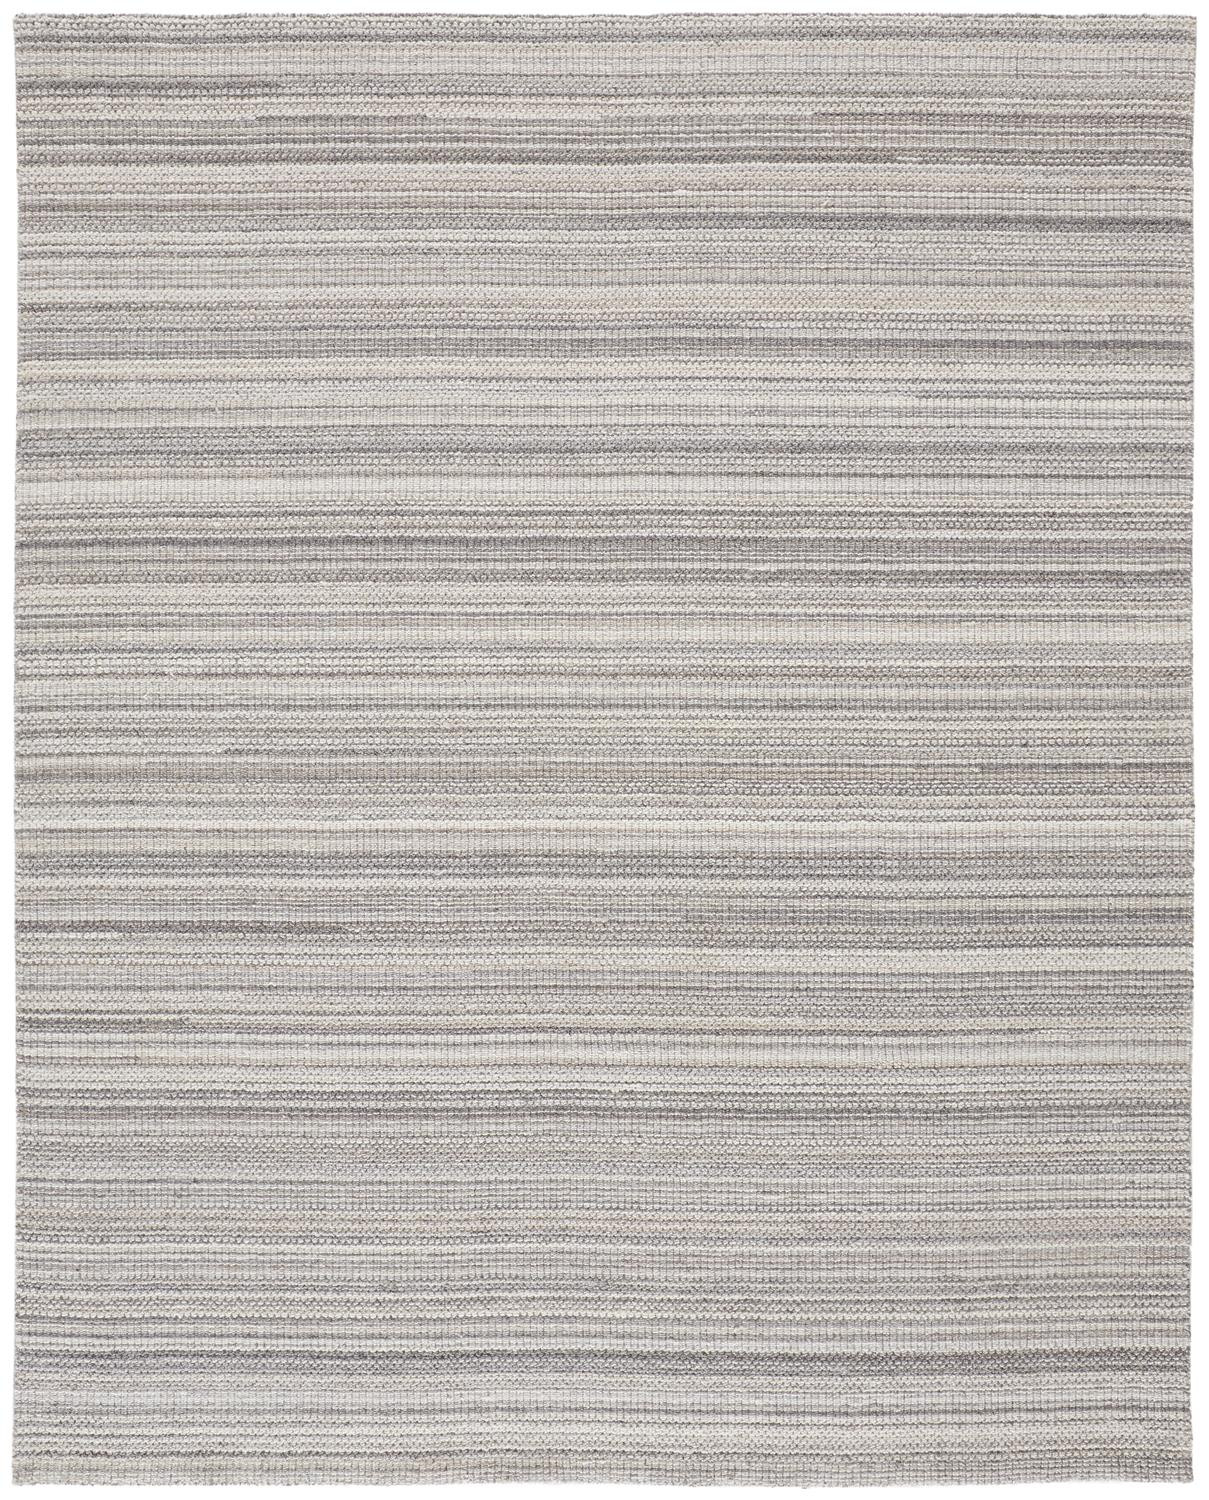 9' X 12' Gray And Taupe Wool Hand Woven Stain Resistant Area Rug-514047-1